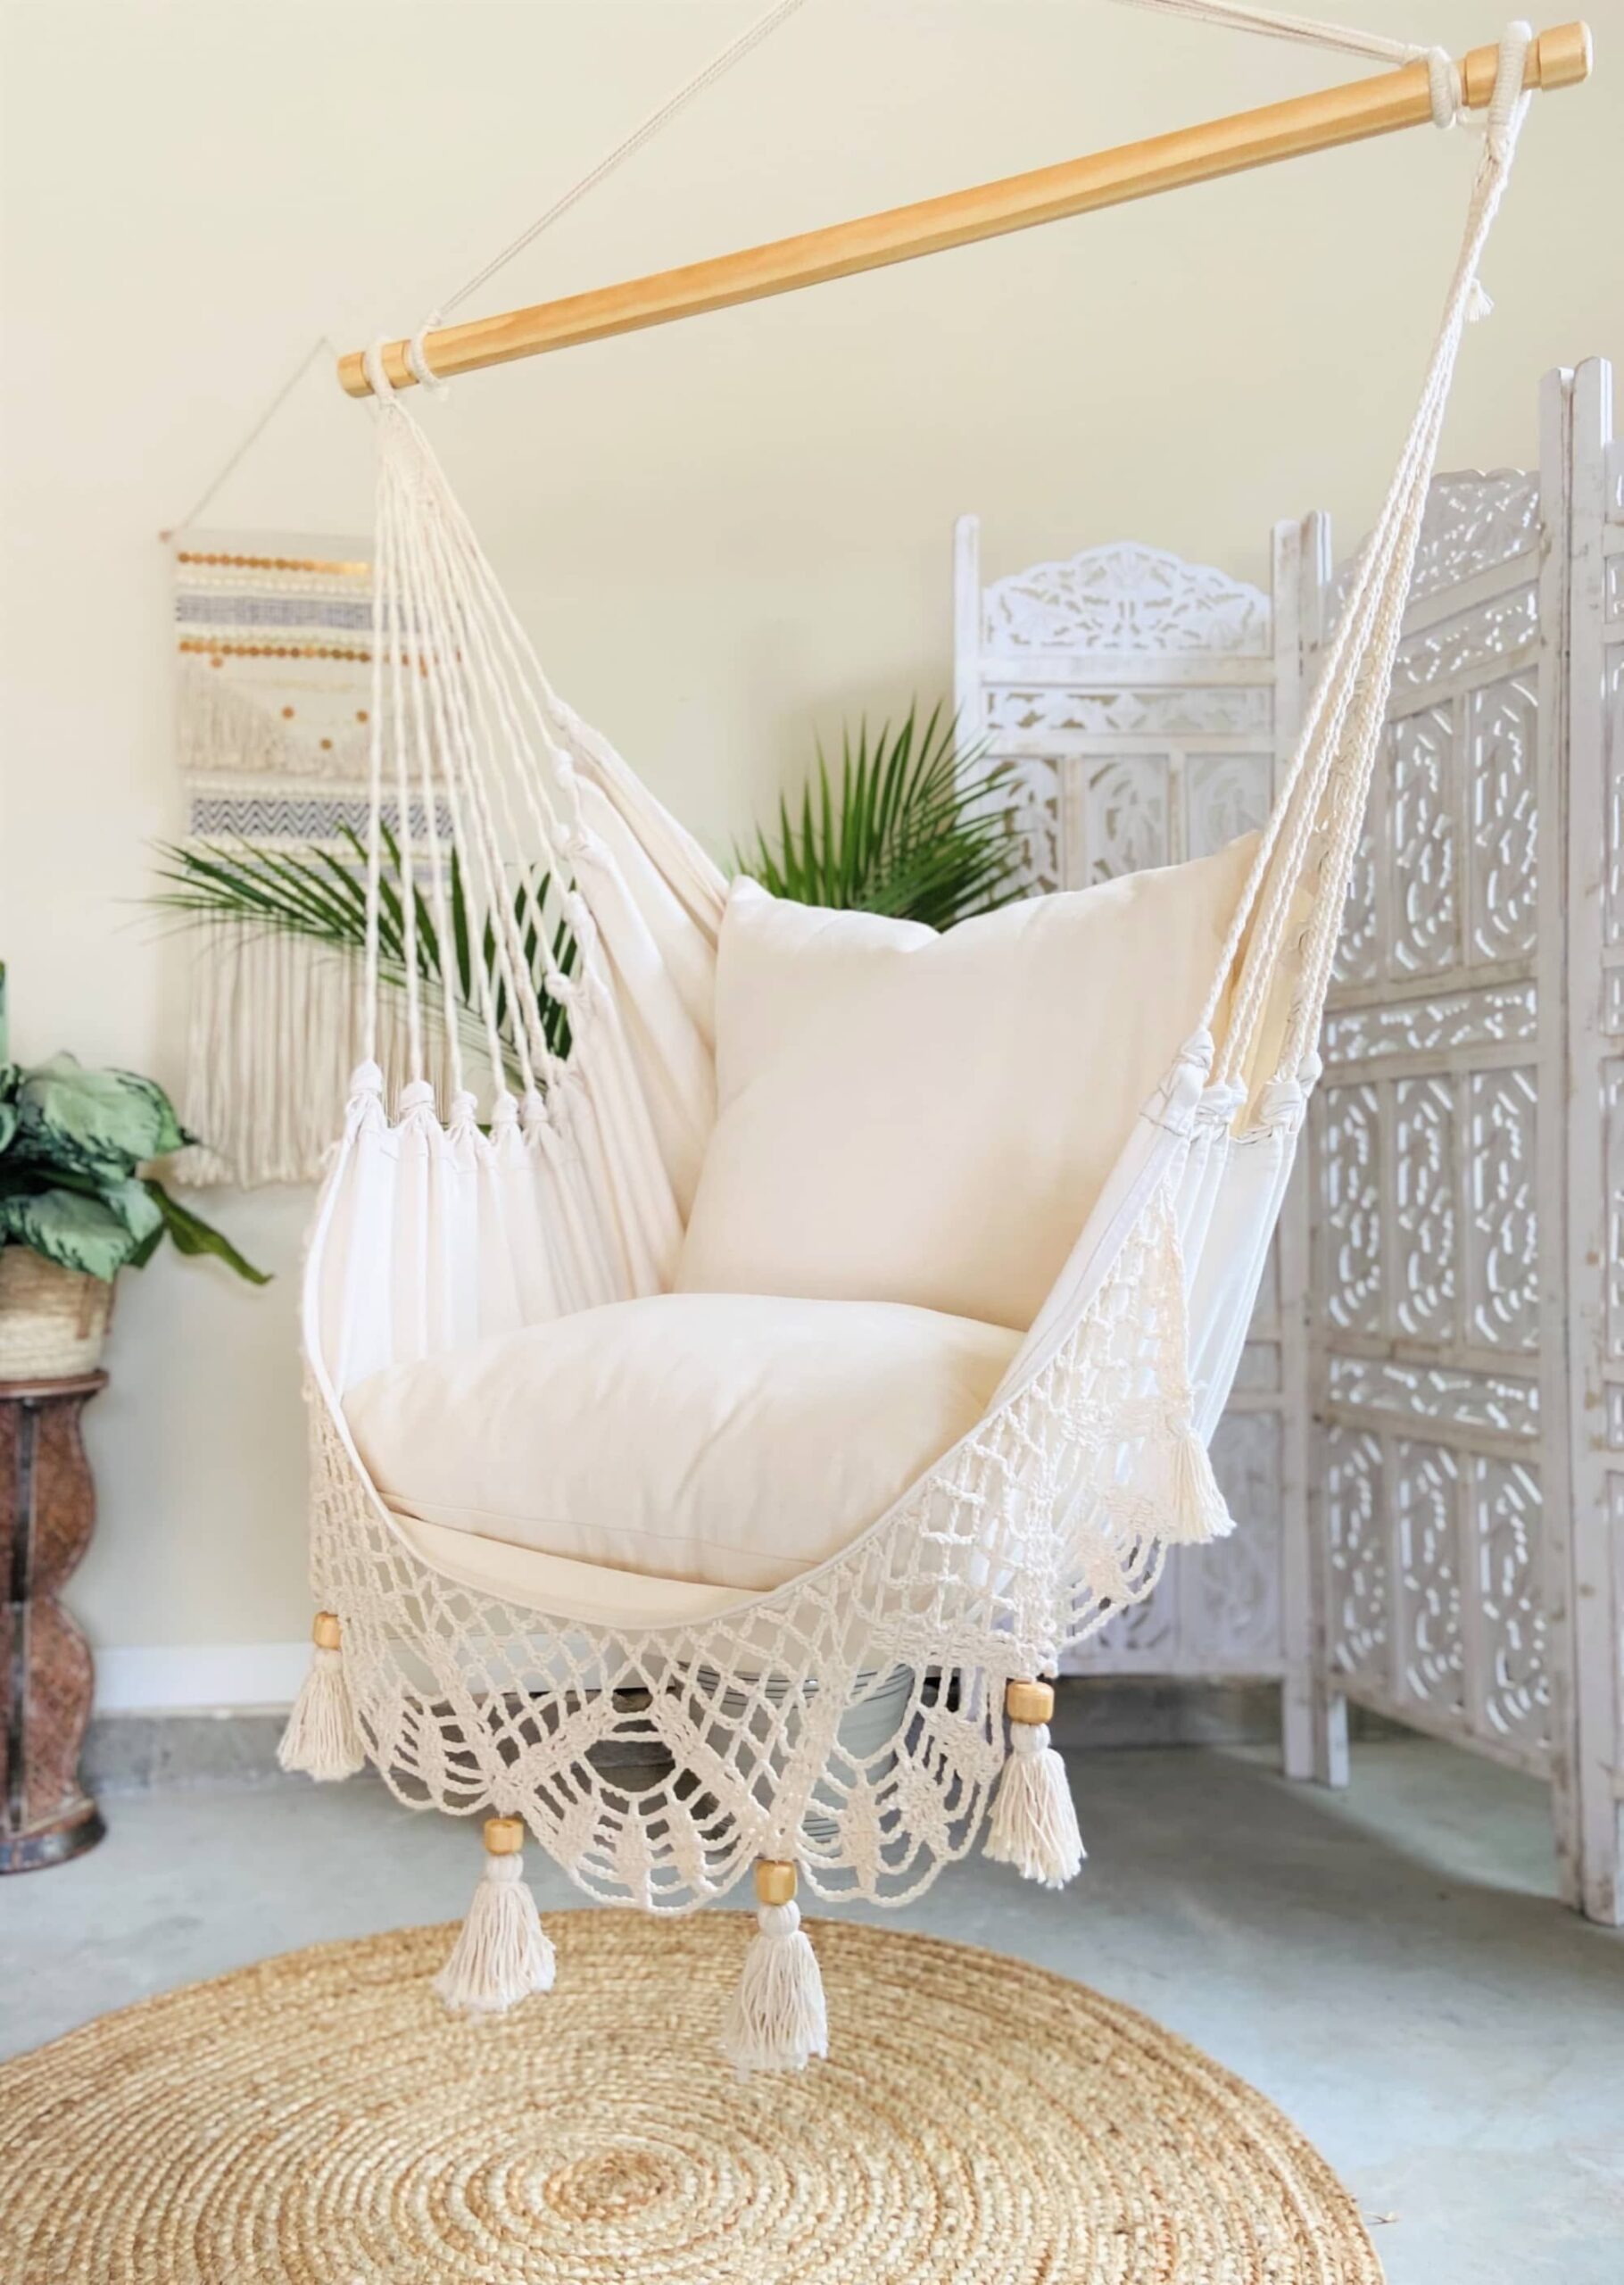 Relaxing in Style with Hammock Chairs: A
Complete Guide